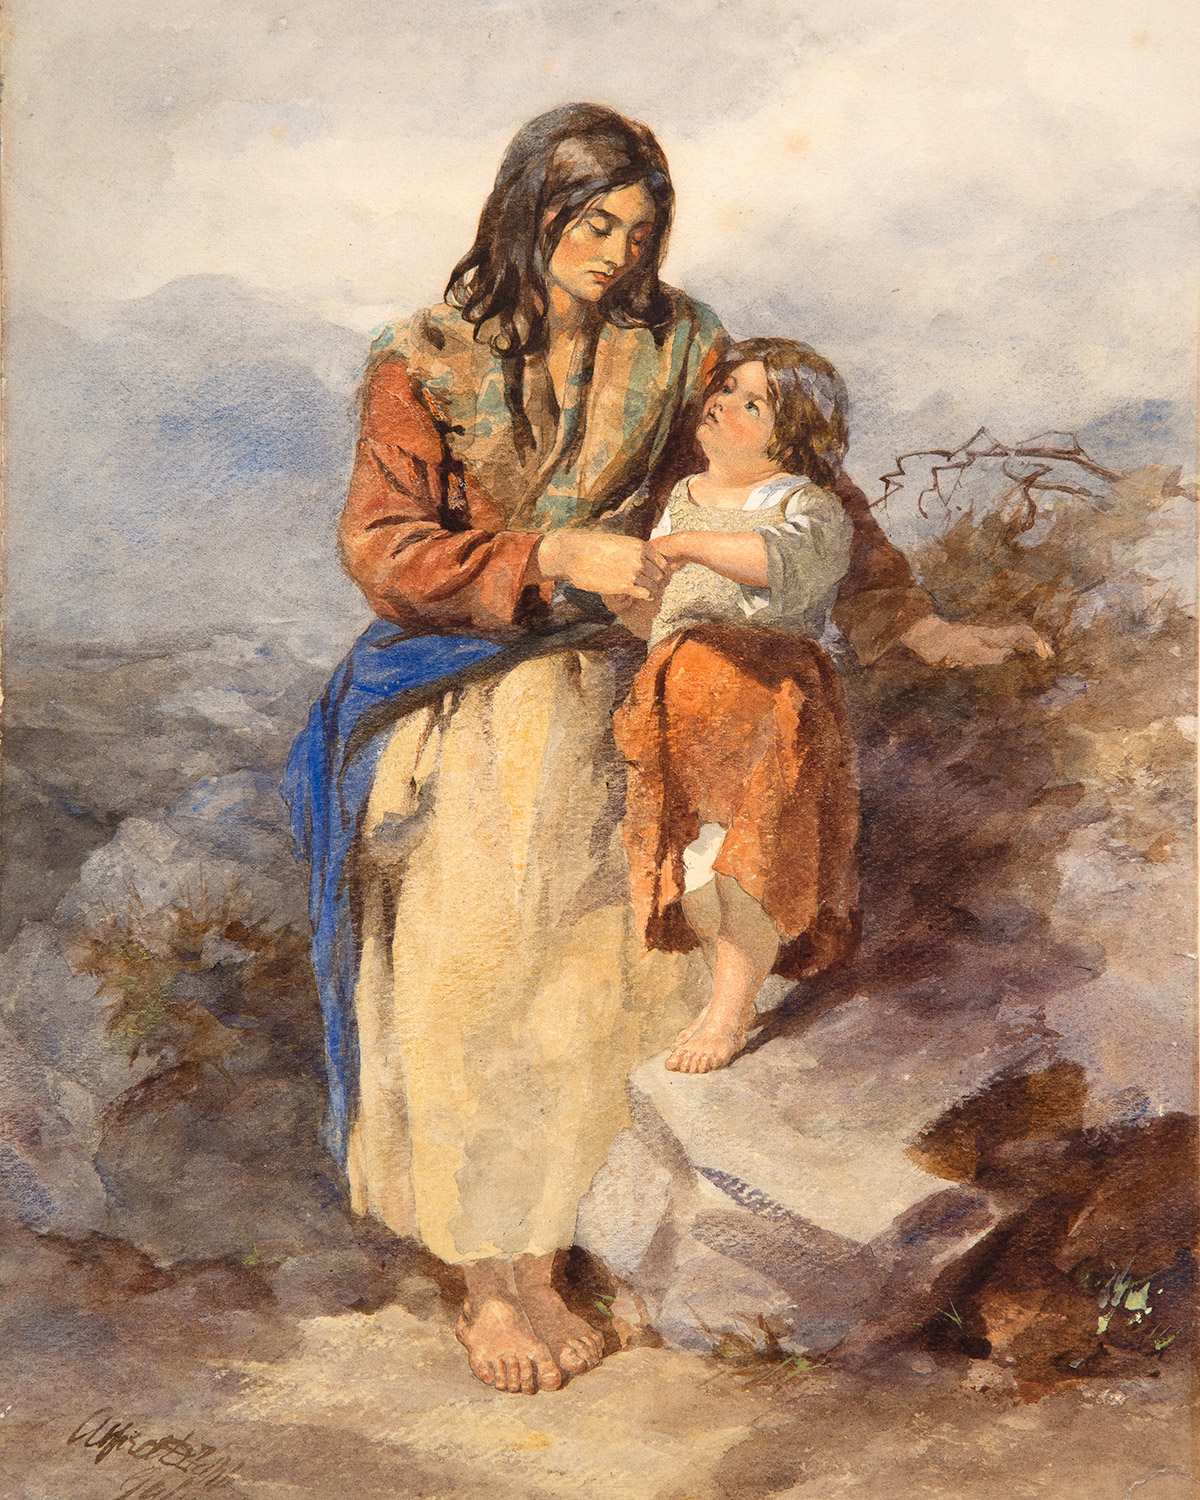 The painting entitled "Galway Woman and Child" by the artist Alfred Downing Fripp